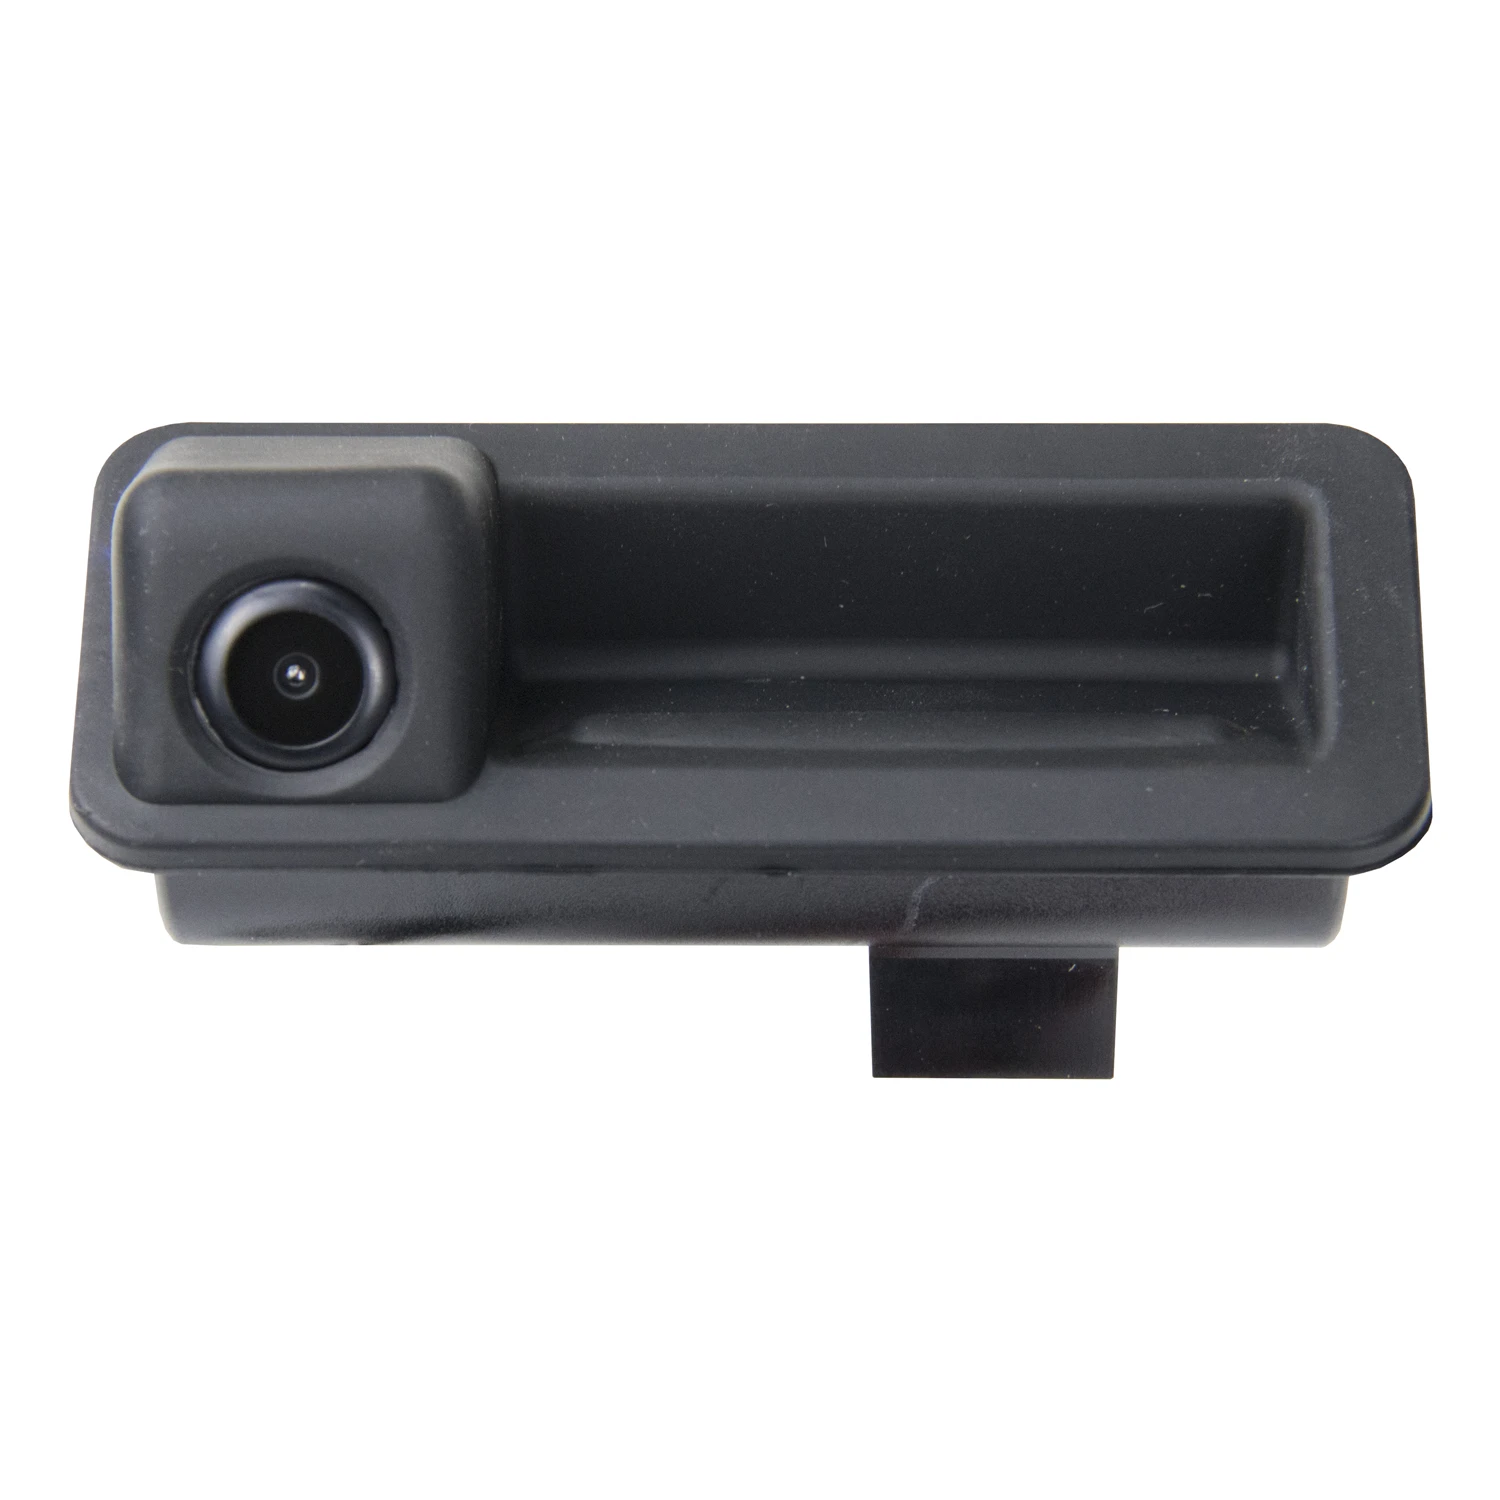 

HD Tailgate Handle Rear View Camera for FORD Mondeo Contour Fusion Fiesta S-Max Focus 2C 3C Land Rover Freelander Range Rover